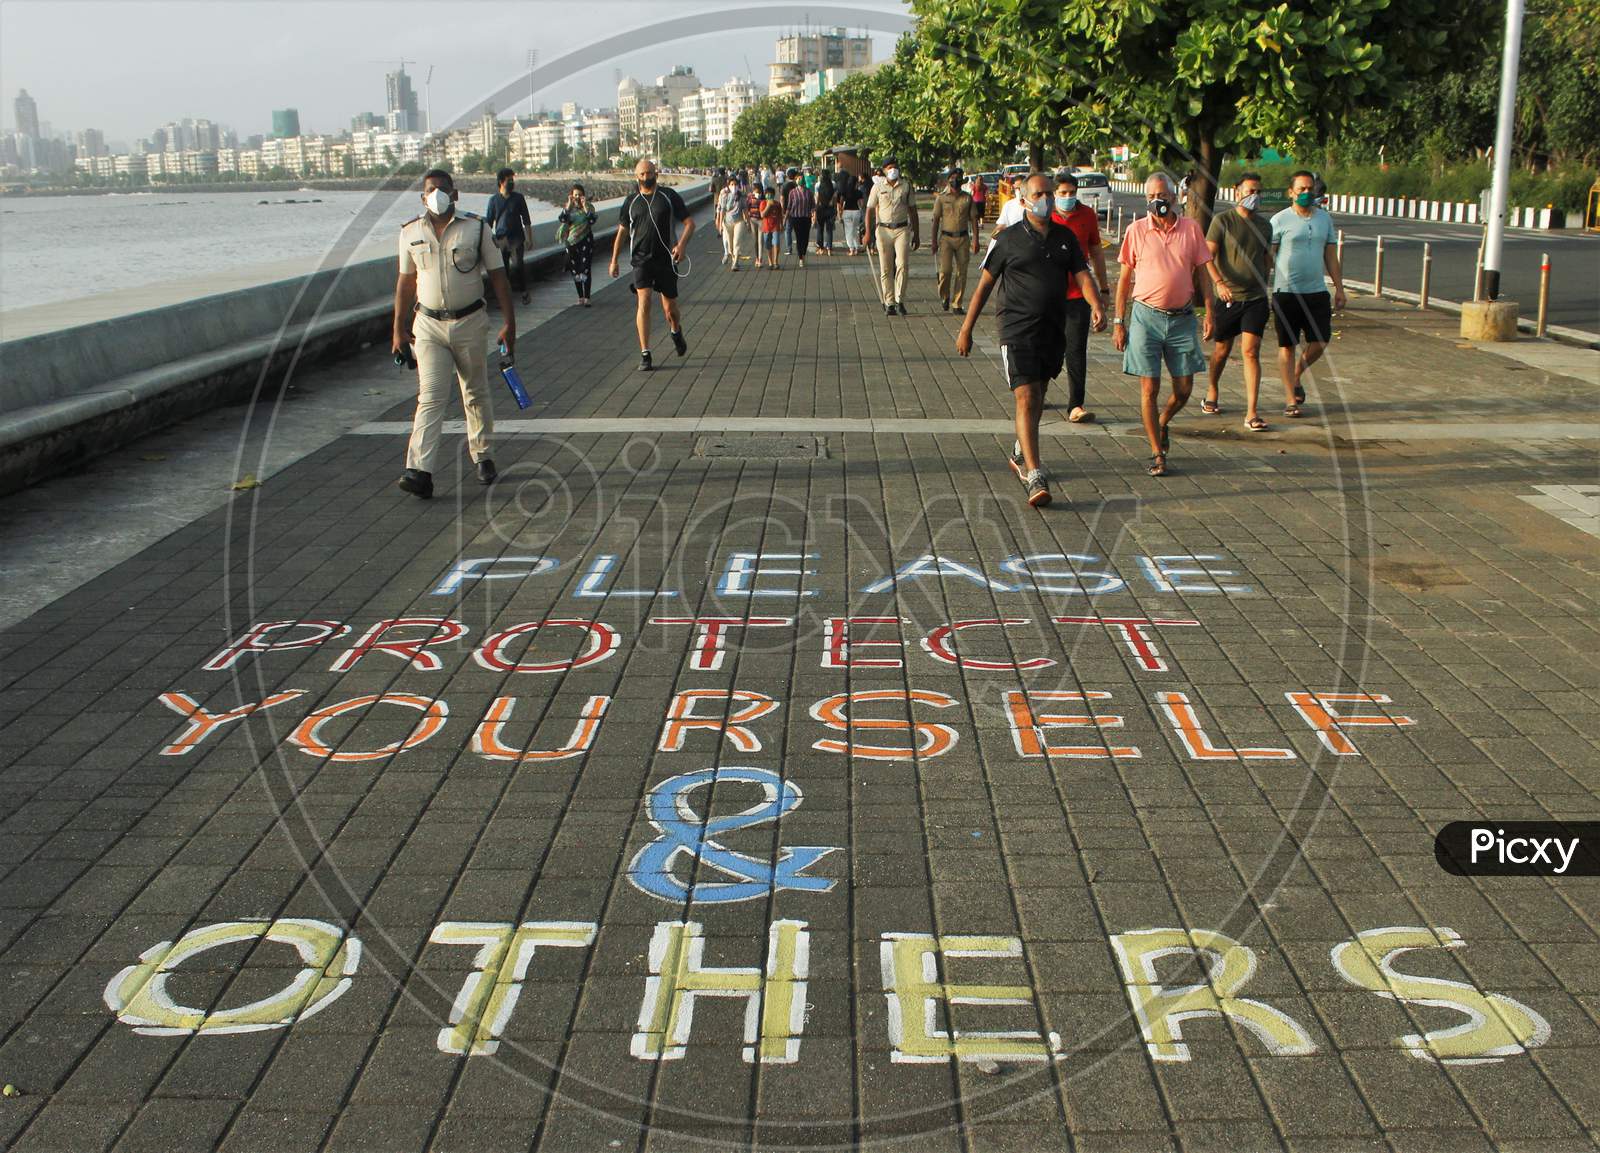 People wearing protective masks walk on a promenade with a slogan that reads "Please protect yourself and others" after some restrictions were lifted in Mumbai,  India on June 6, 2020.